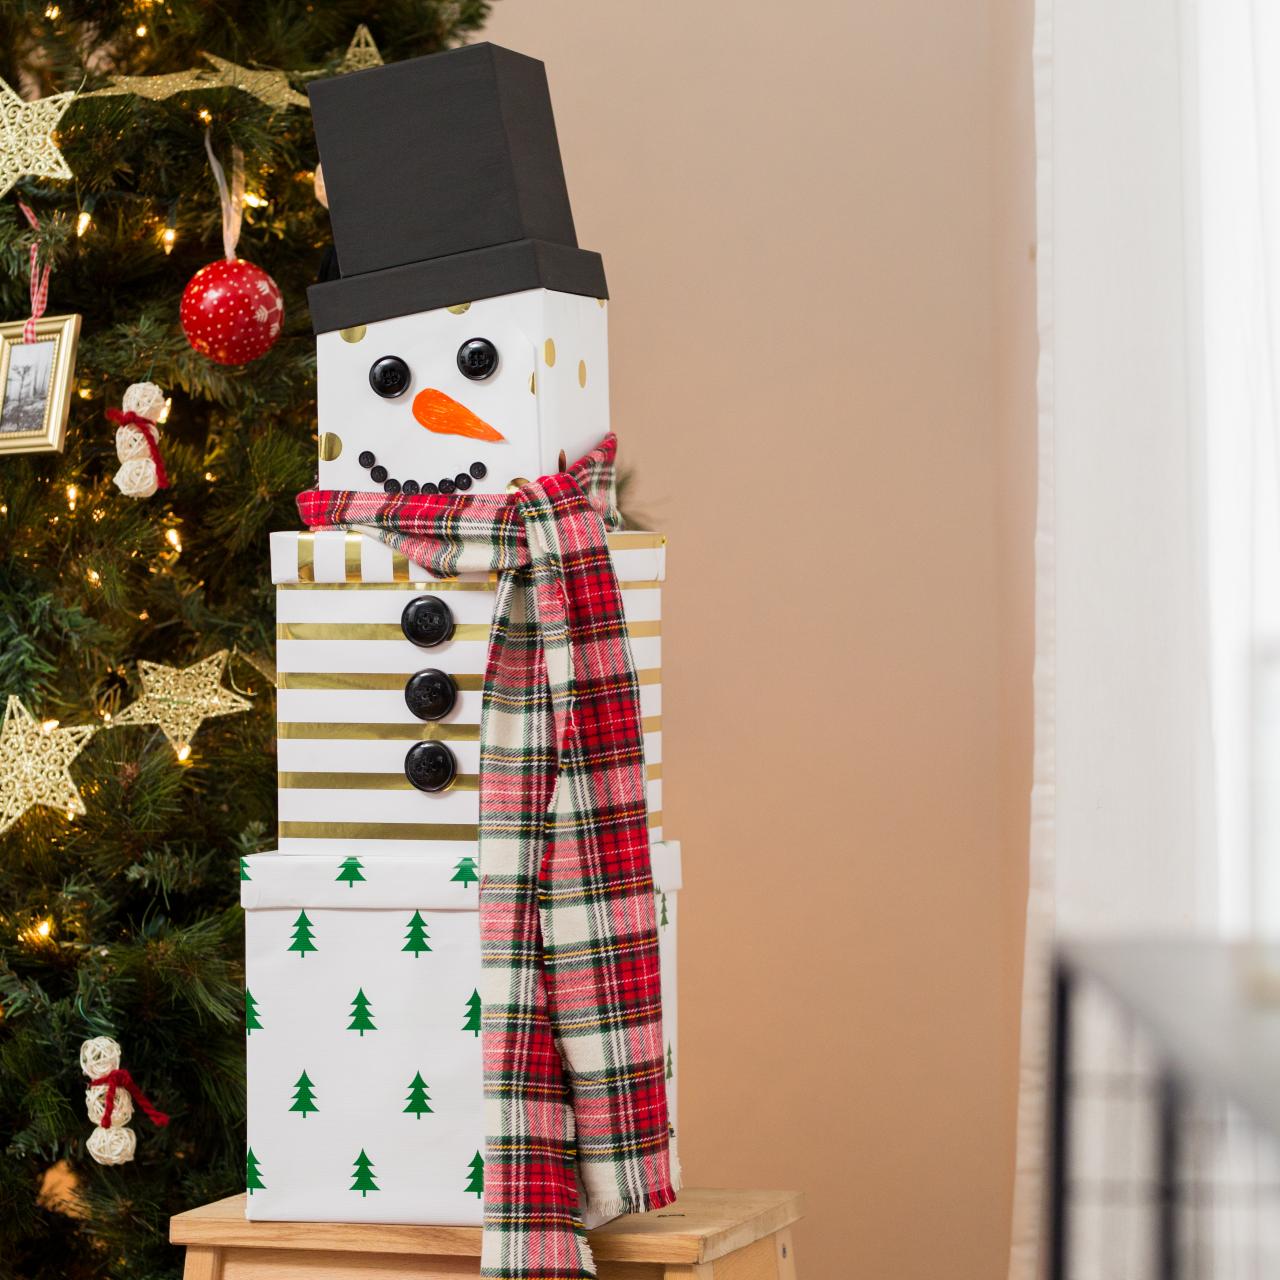 DIY Ideas for Decorating With Wrapped Christmas Boxes